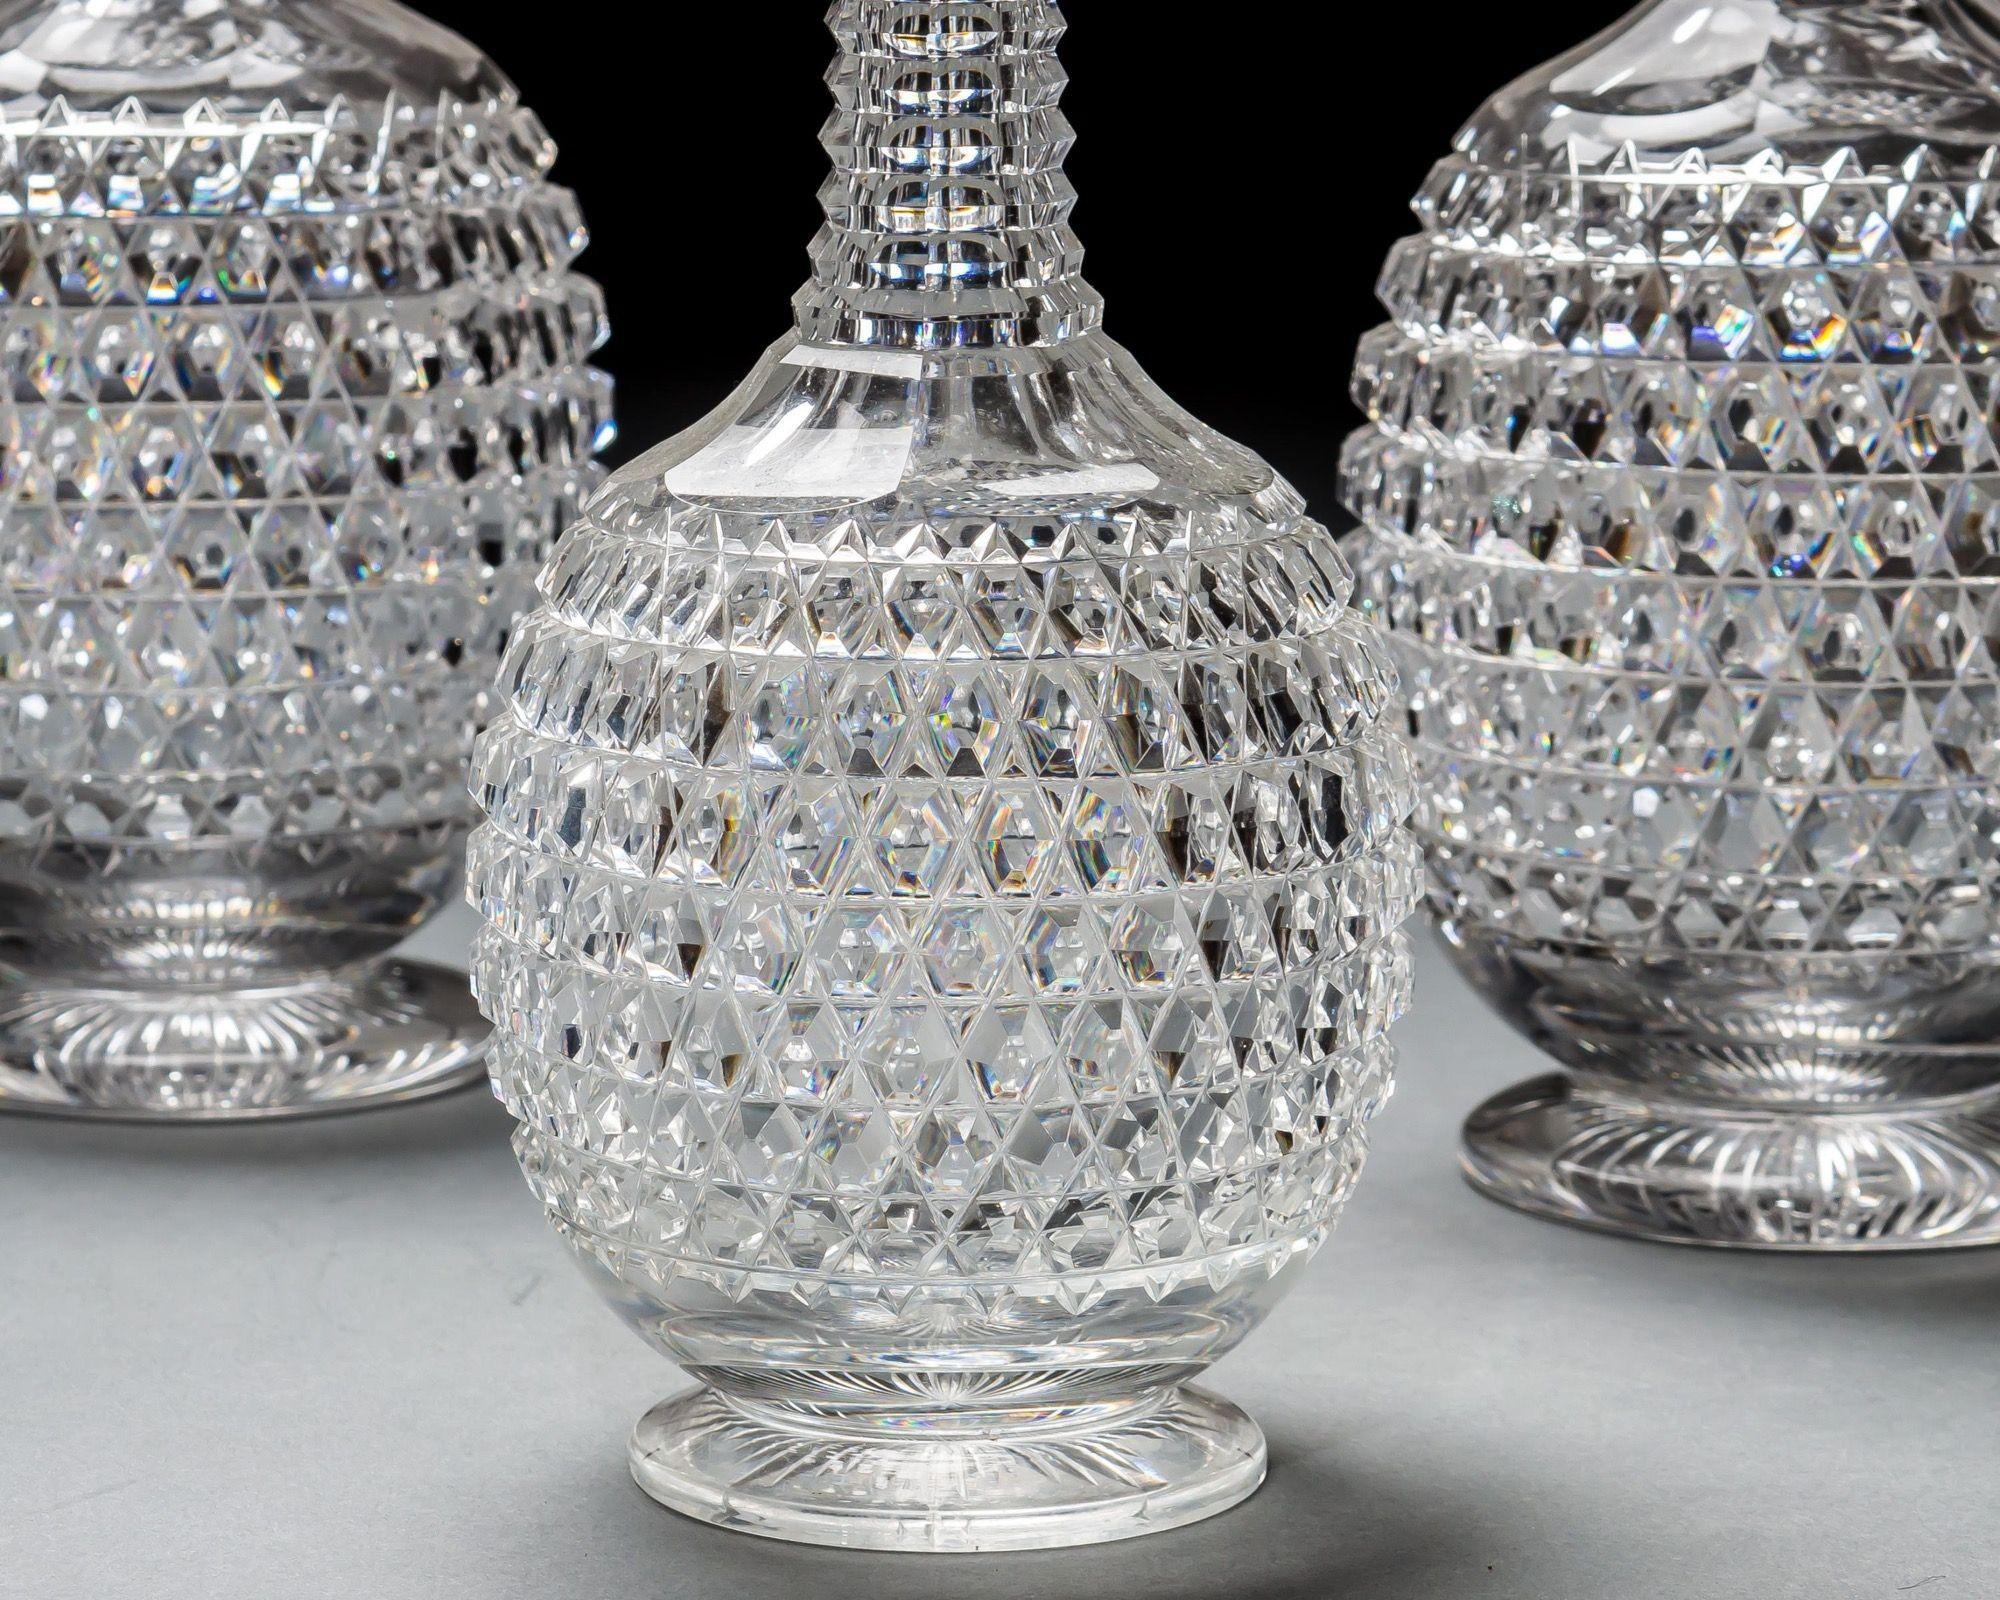 An elaborately cut suite of Victorian decanters consisting of four standard size decanters and two spirit decanters.

SPIRIT DIMENSIONS

Height - 27.5 cm / 11